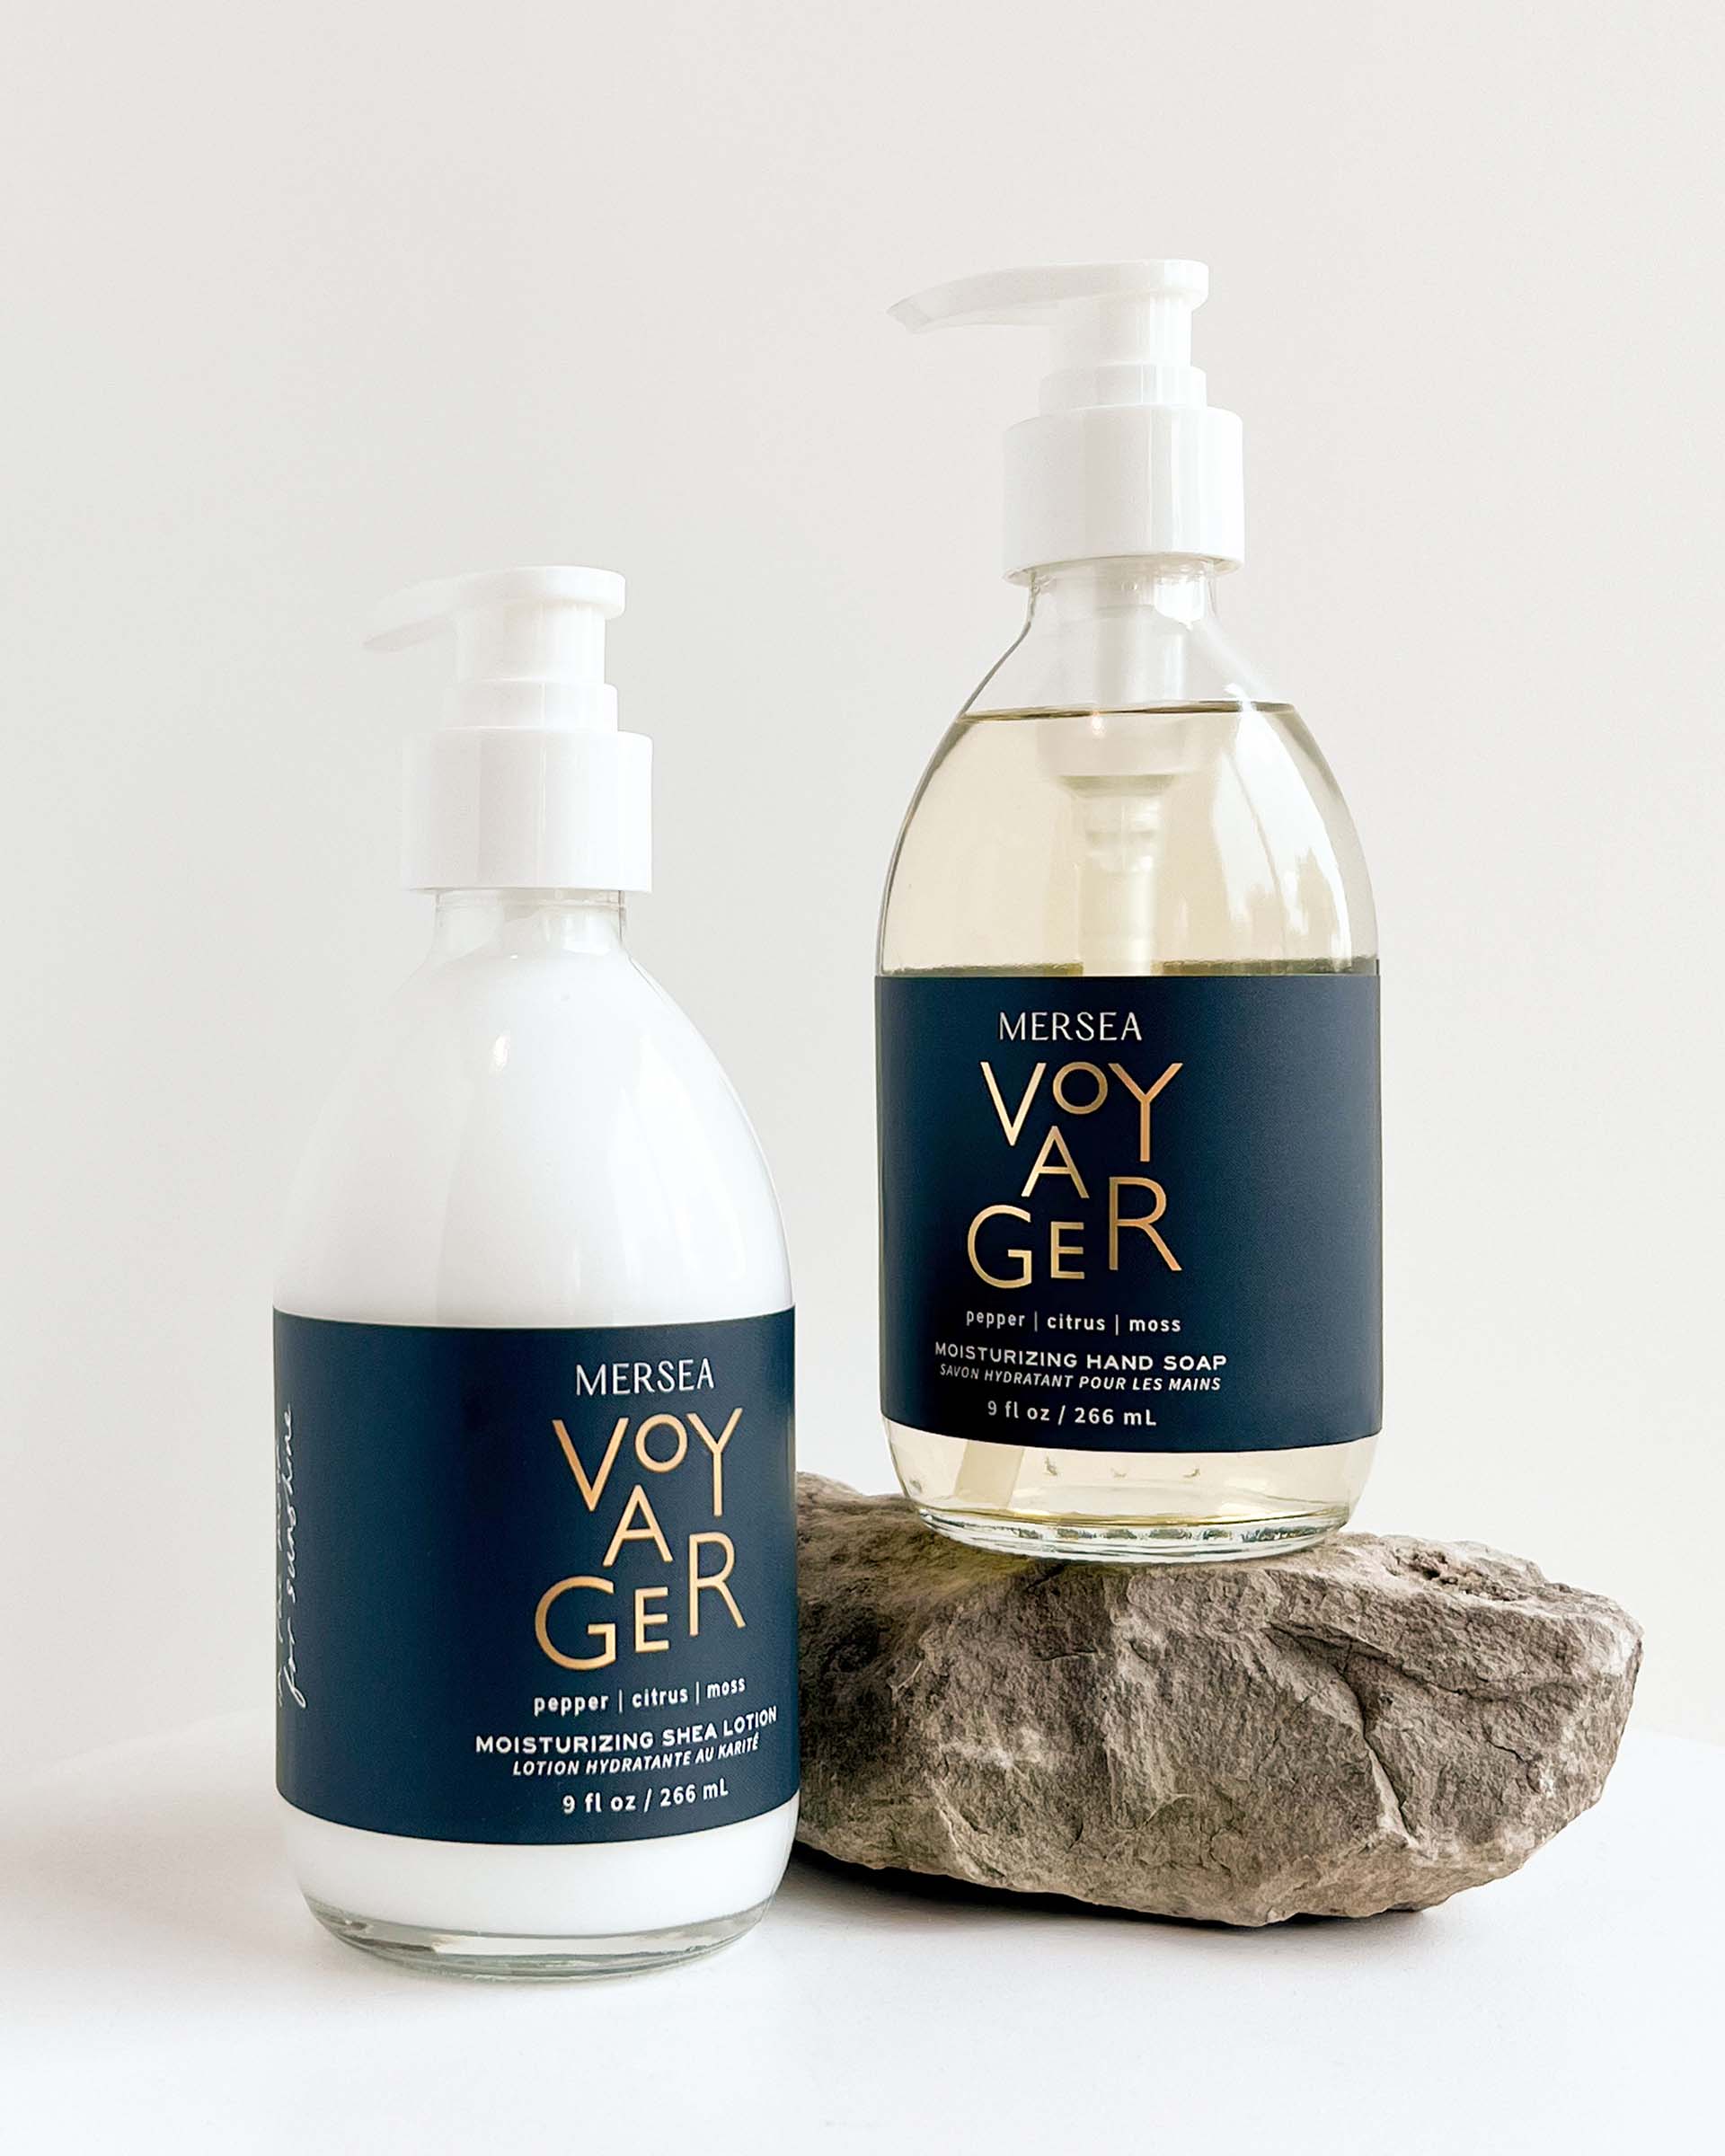 voyager liquid hand soap and shea lotion laying on a white background